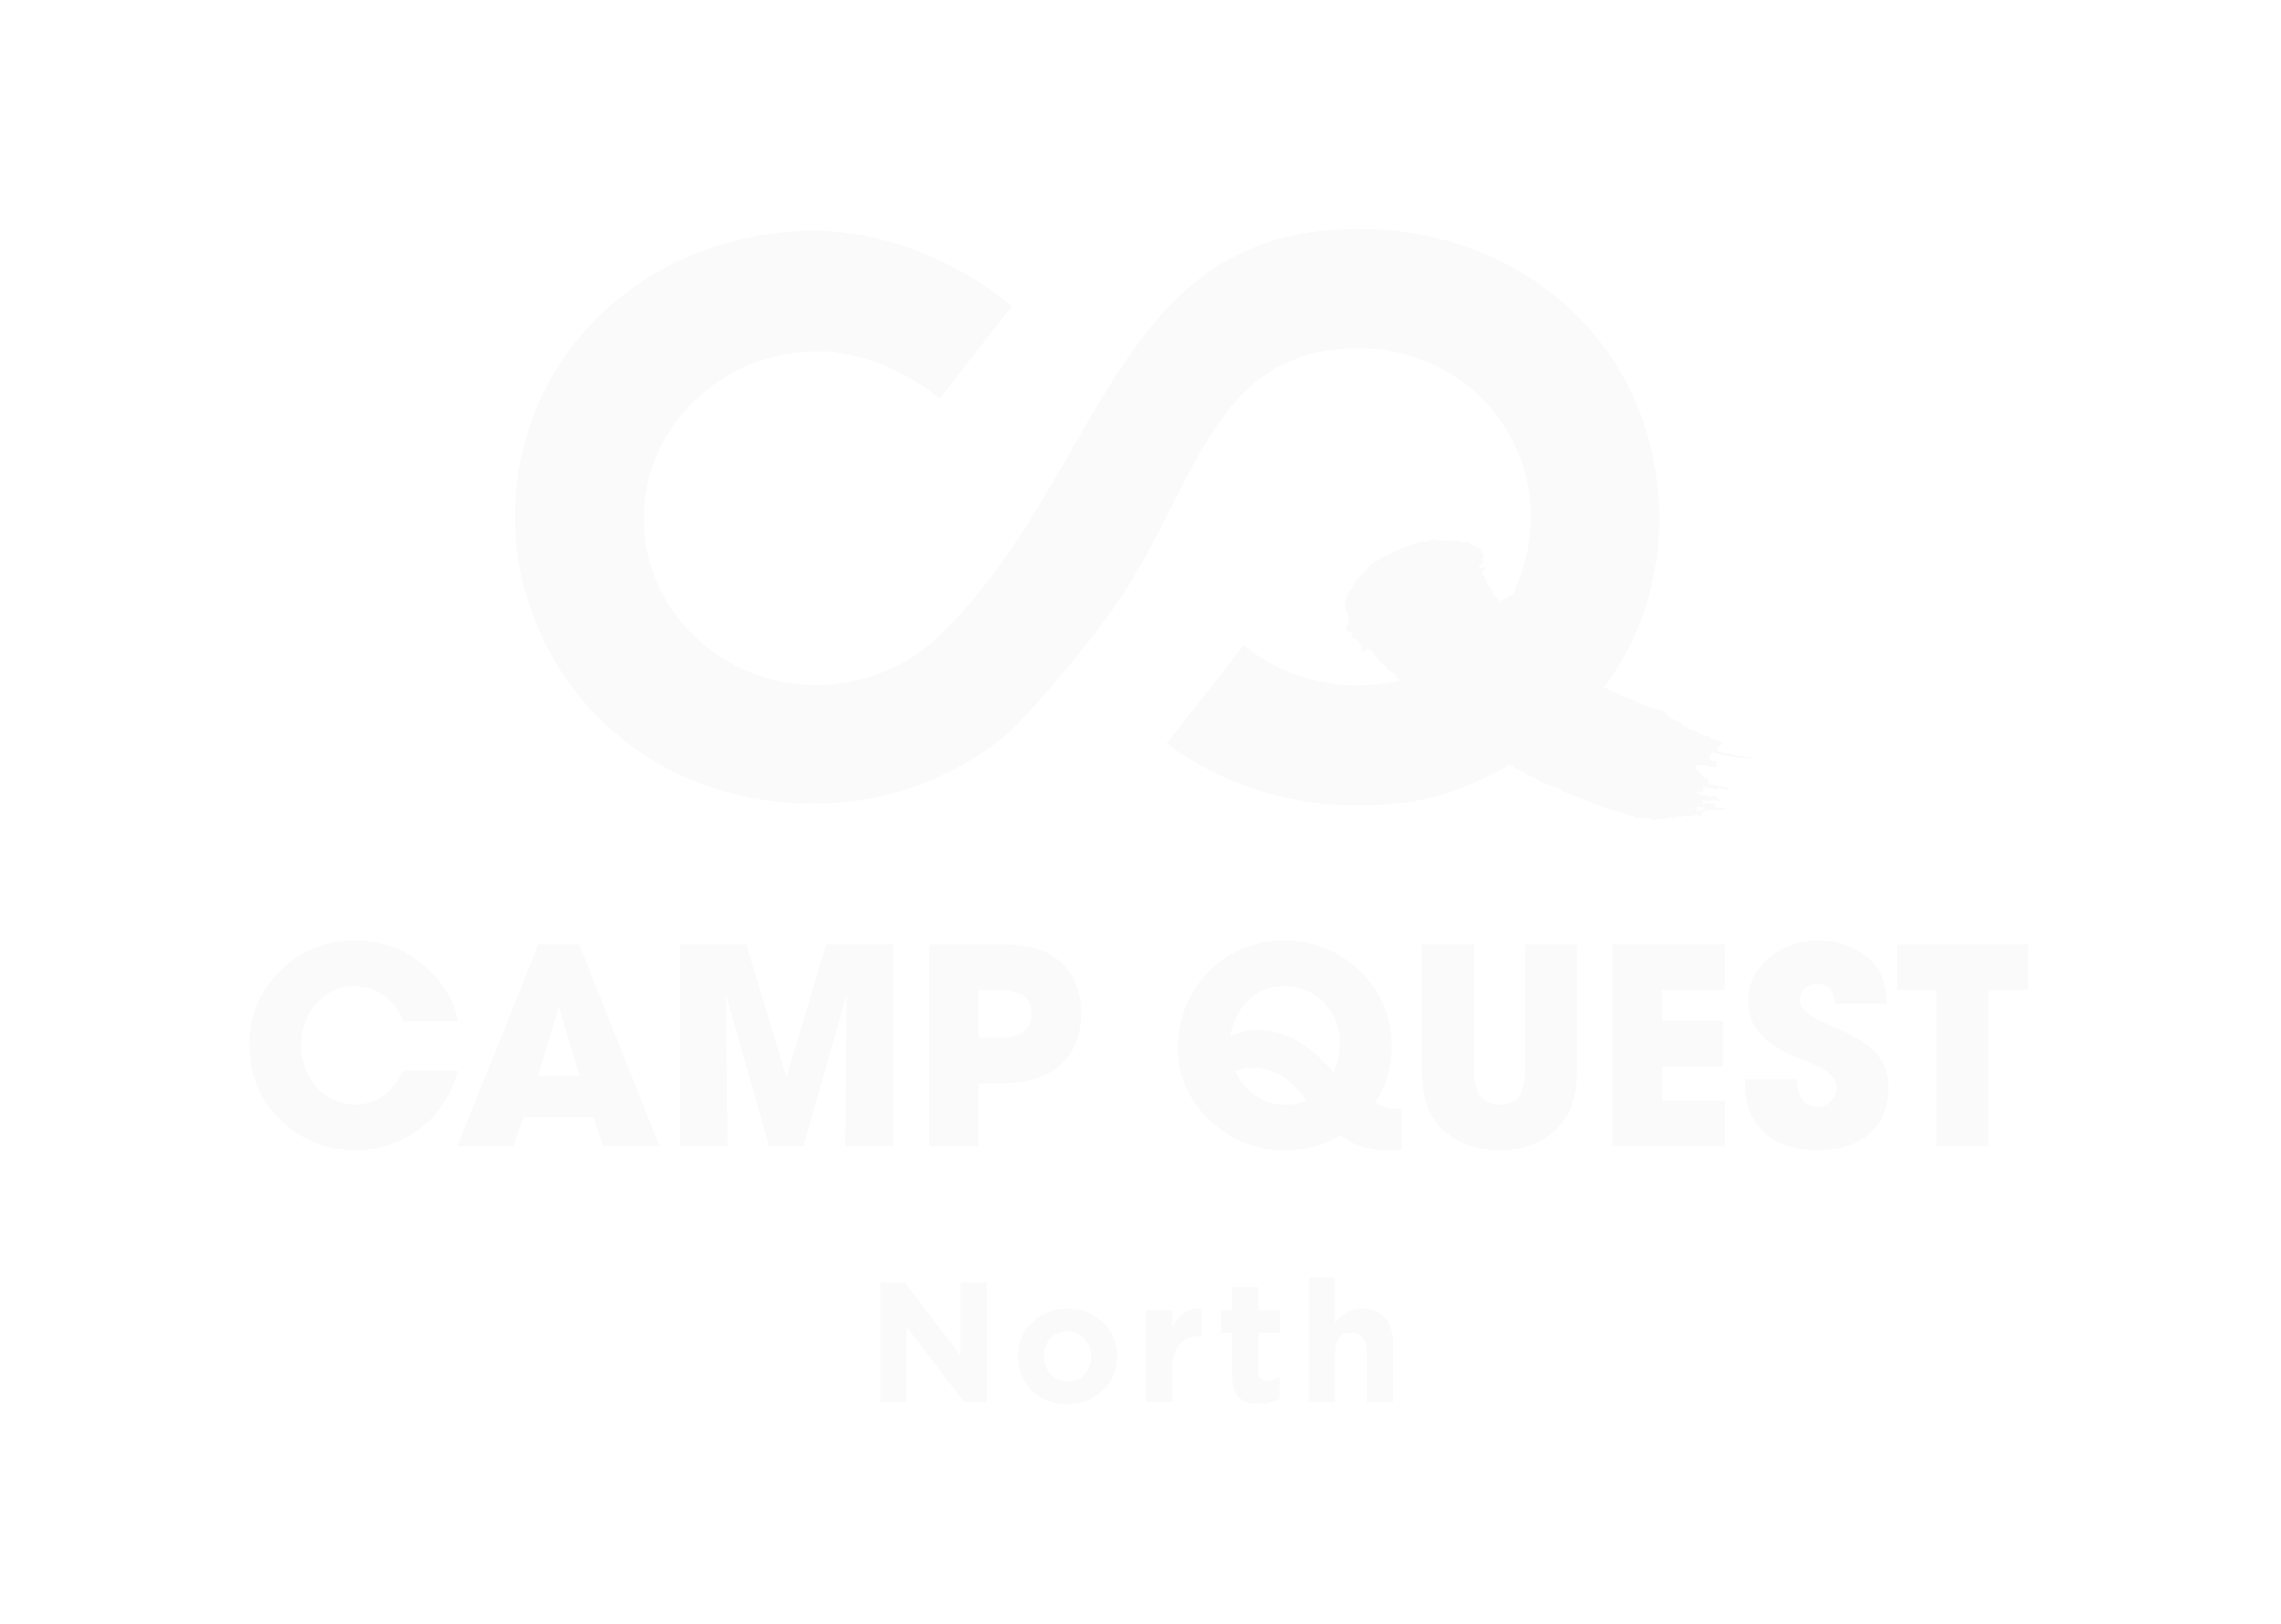 Camp Quest North